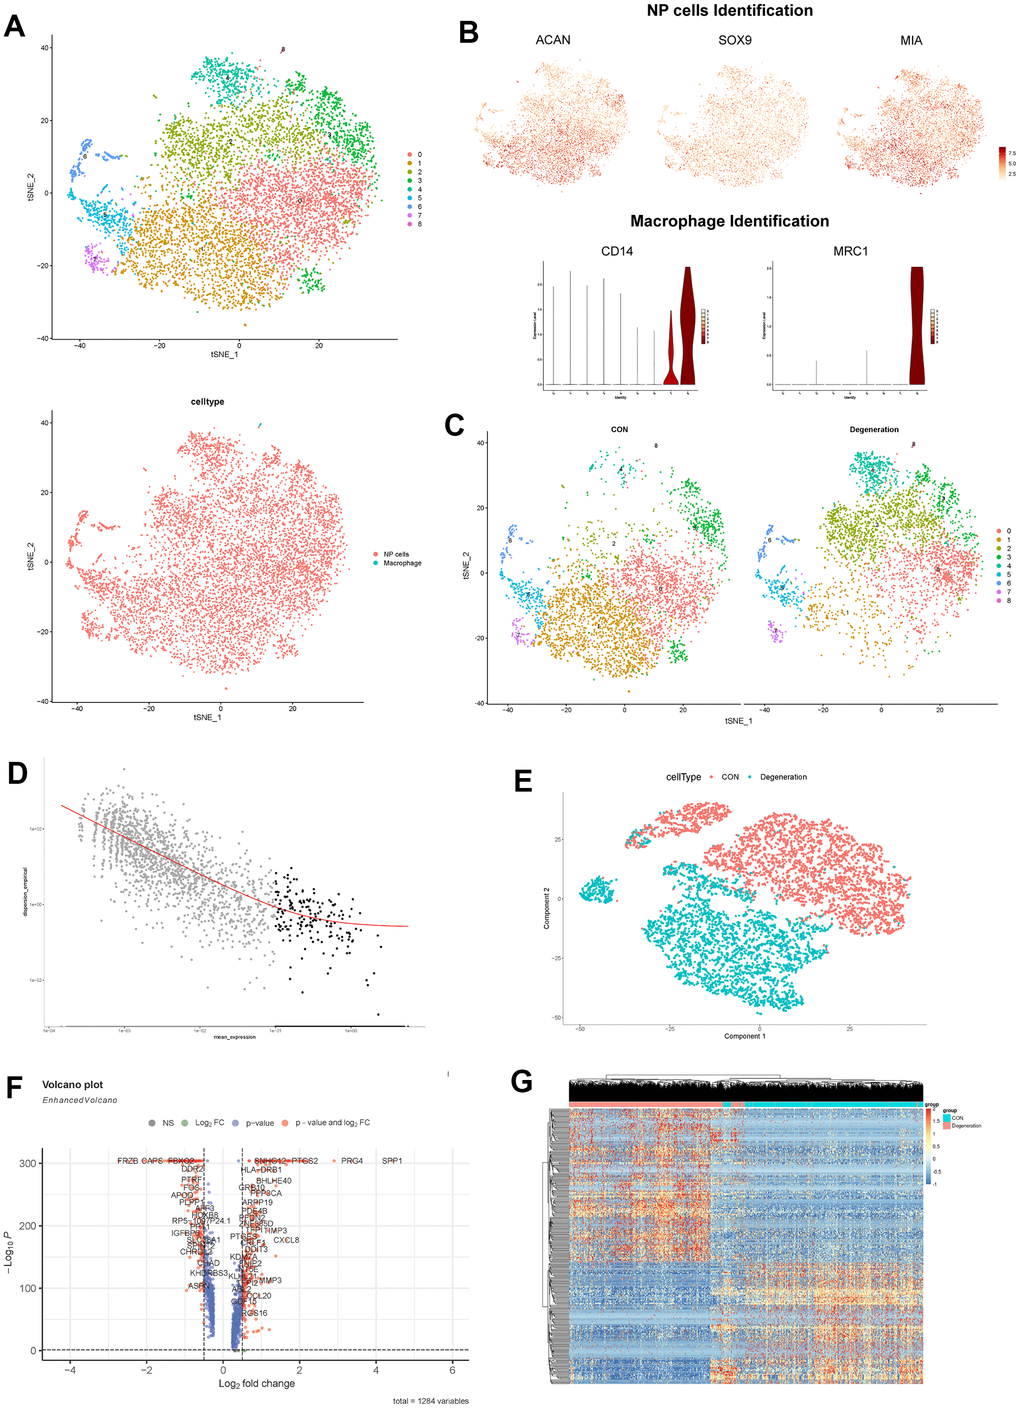 (A) tSNE visualization of all cells in NP tissues after sample integration, 9 clustered were generated. (B) Dot plot showing the NP cells marker genes ACAN, SOX9 and MIA within tSNE map; and violin plot showing the expression of macrophage marker genes CD14 and MRC1. (C) tSNE visualization of all cells in NP tissues between degeneration and non-degeneration group. (D) Selection of the most variable genes for monocle analysis. (E) PCA dimensional reduction by monocle algorithm between degeneration and non-degeneration group. (F) Volcano scatter plot of the genes analyzed by monocle method. (G) Hierarchical clustering heatmap of the analyzed DEGs in each cell.